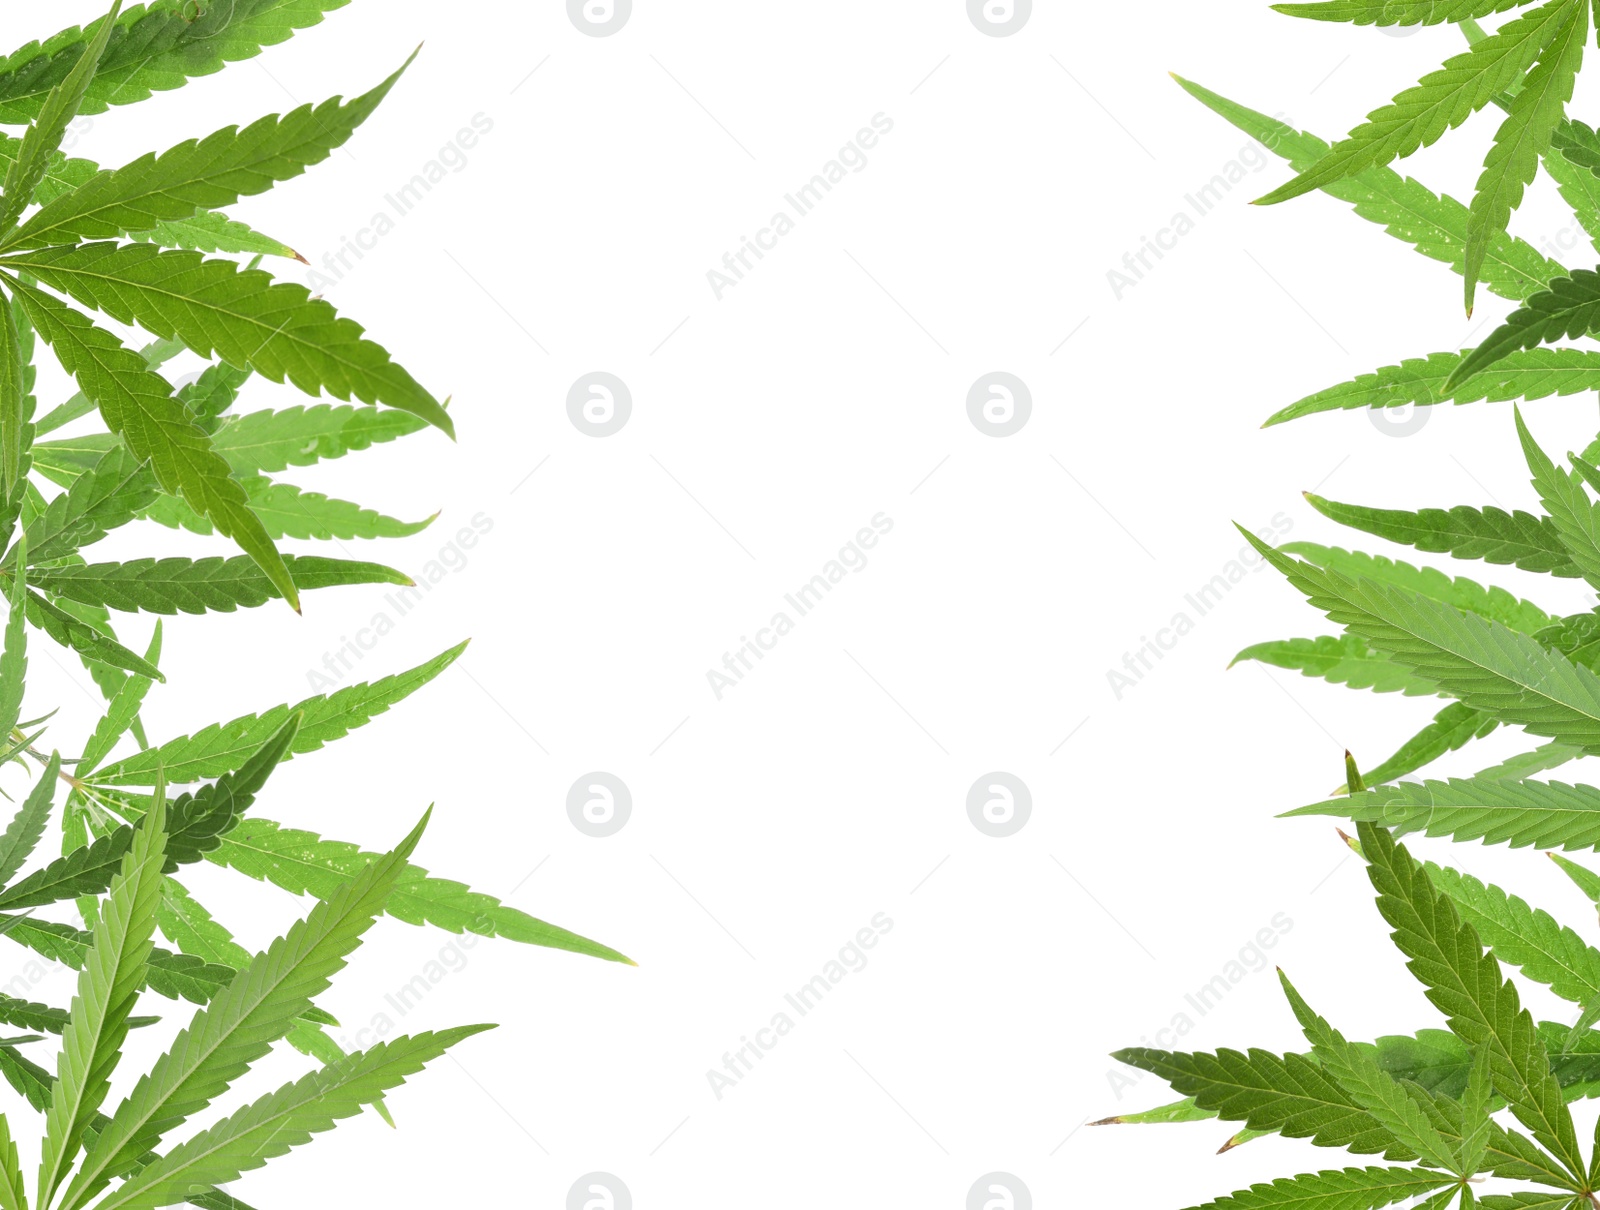 Image of Green leaves of hemp plant on white background